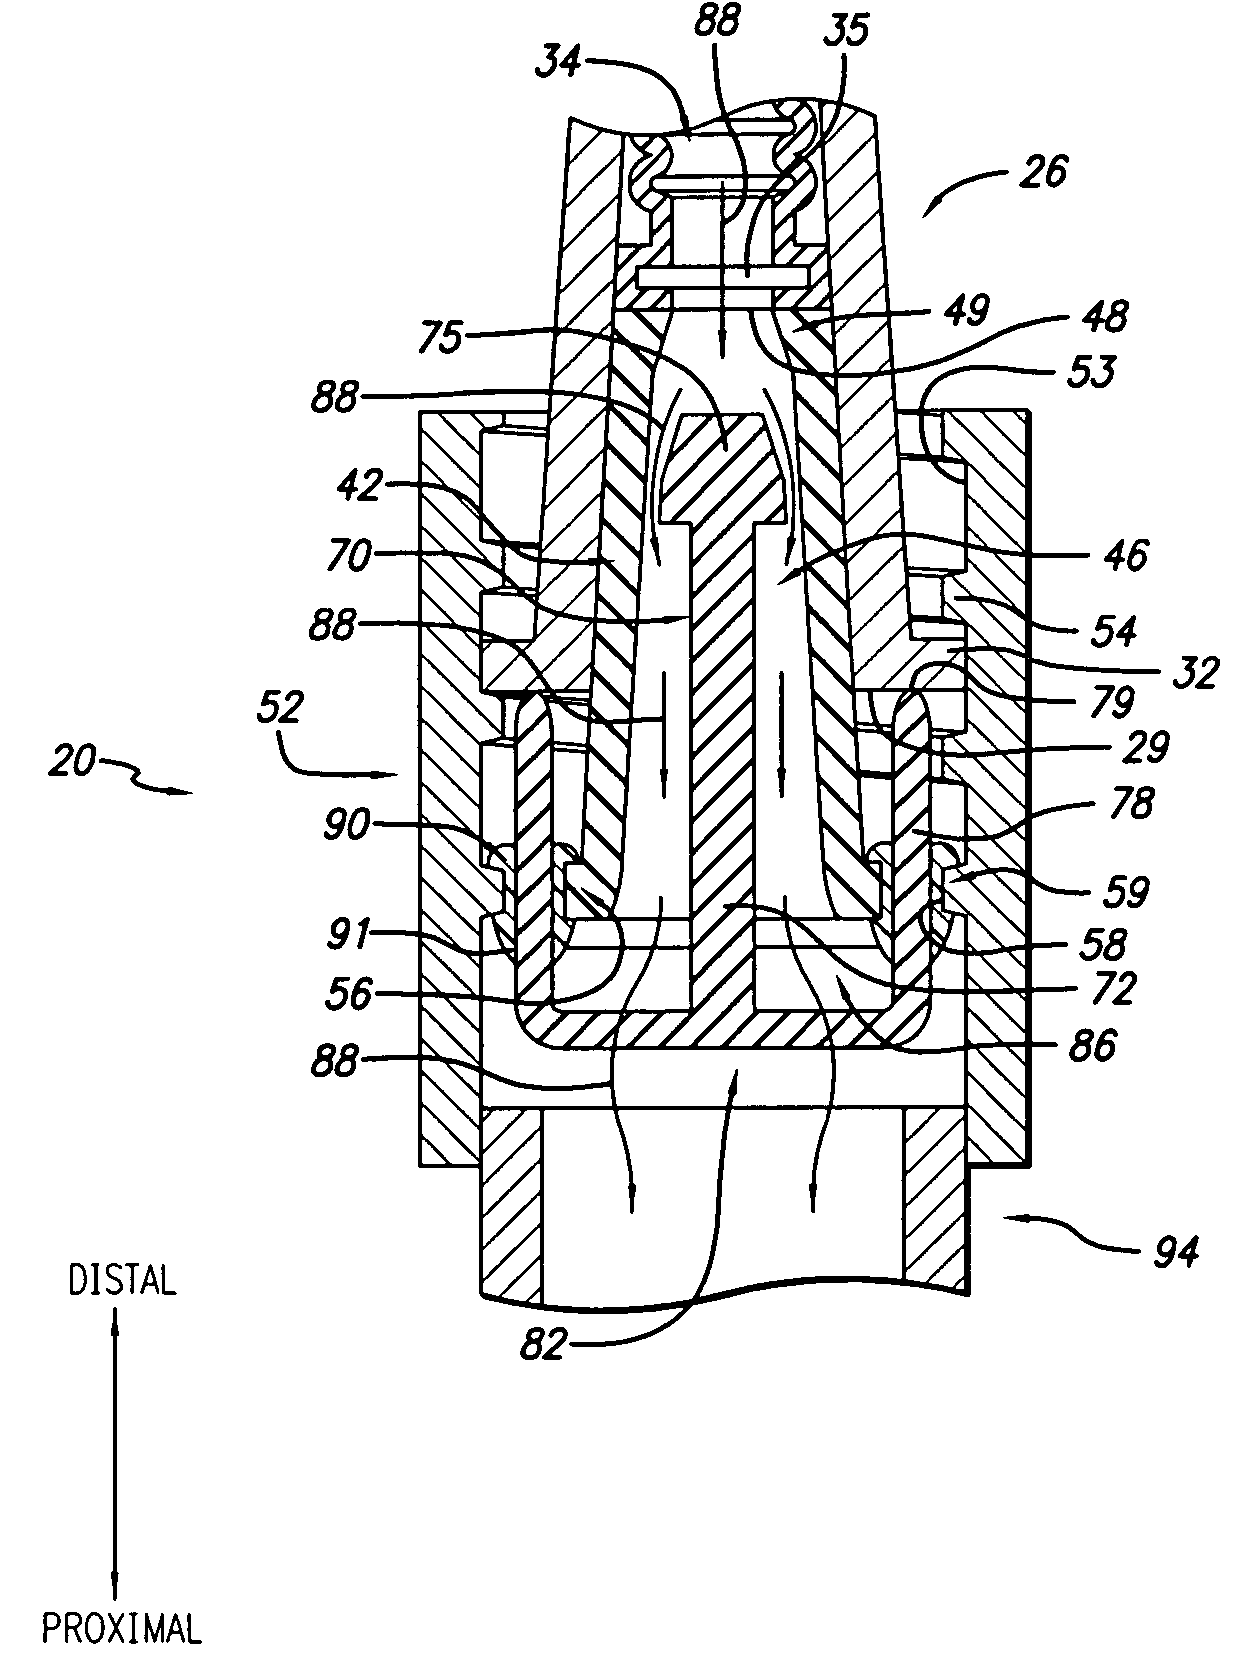 Self-sealing male Luer connector with biased valve plug